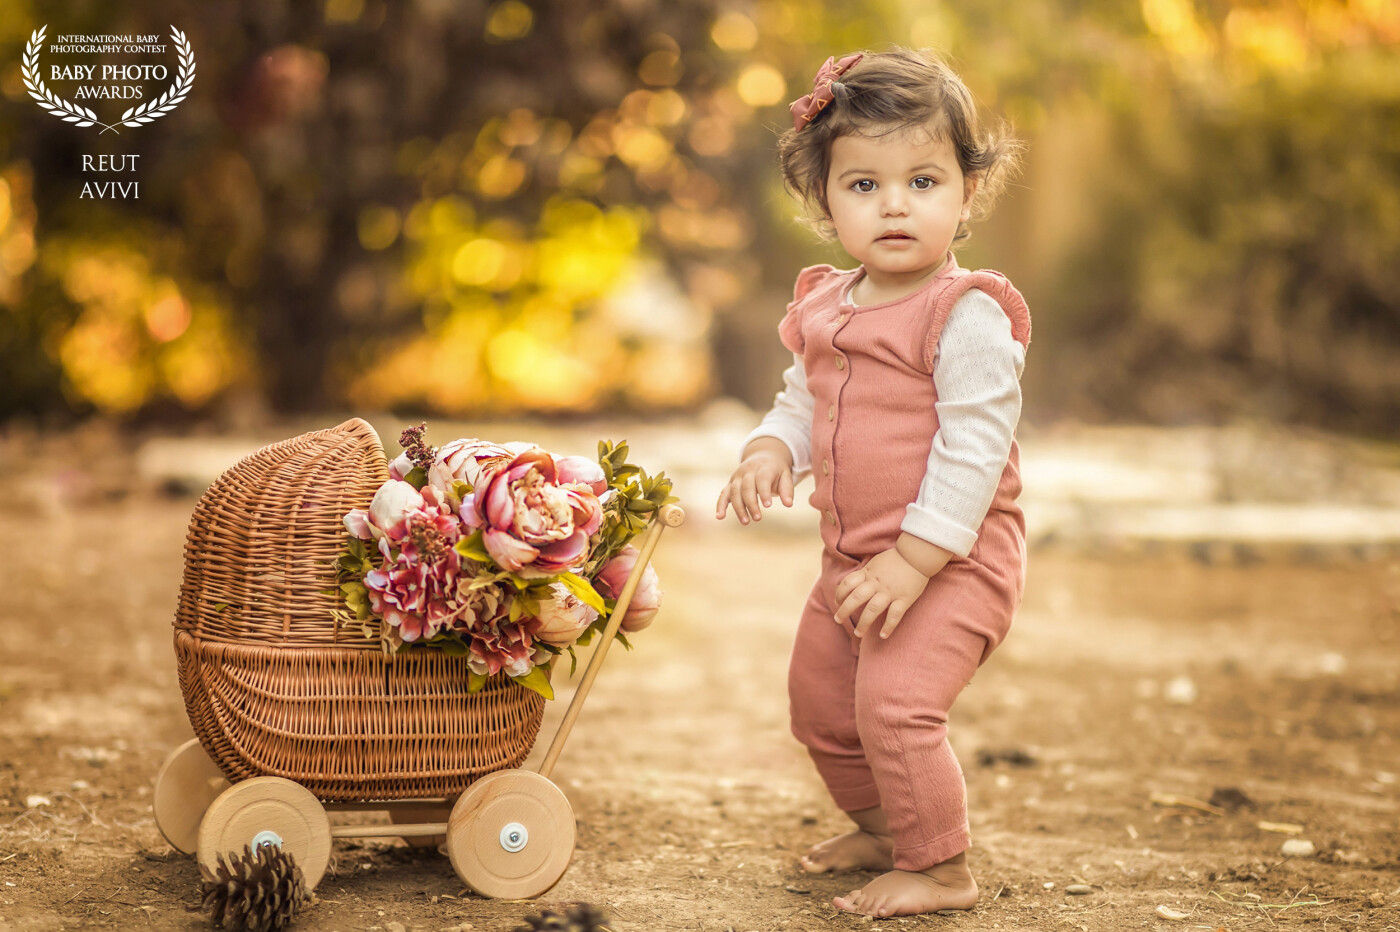 I had so much fun shooting this beautiful outdoor photo of this precious little one!<br />
This is the little Nega who came for one-year photo shoots in my studio, a girl in the form of a doll, I fell in love ♥